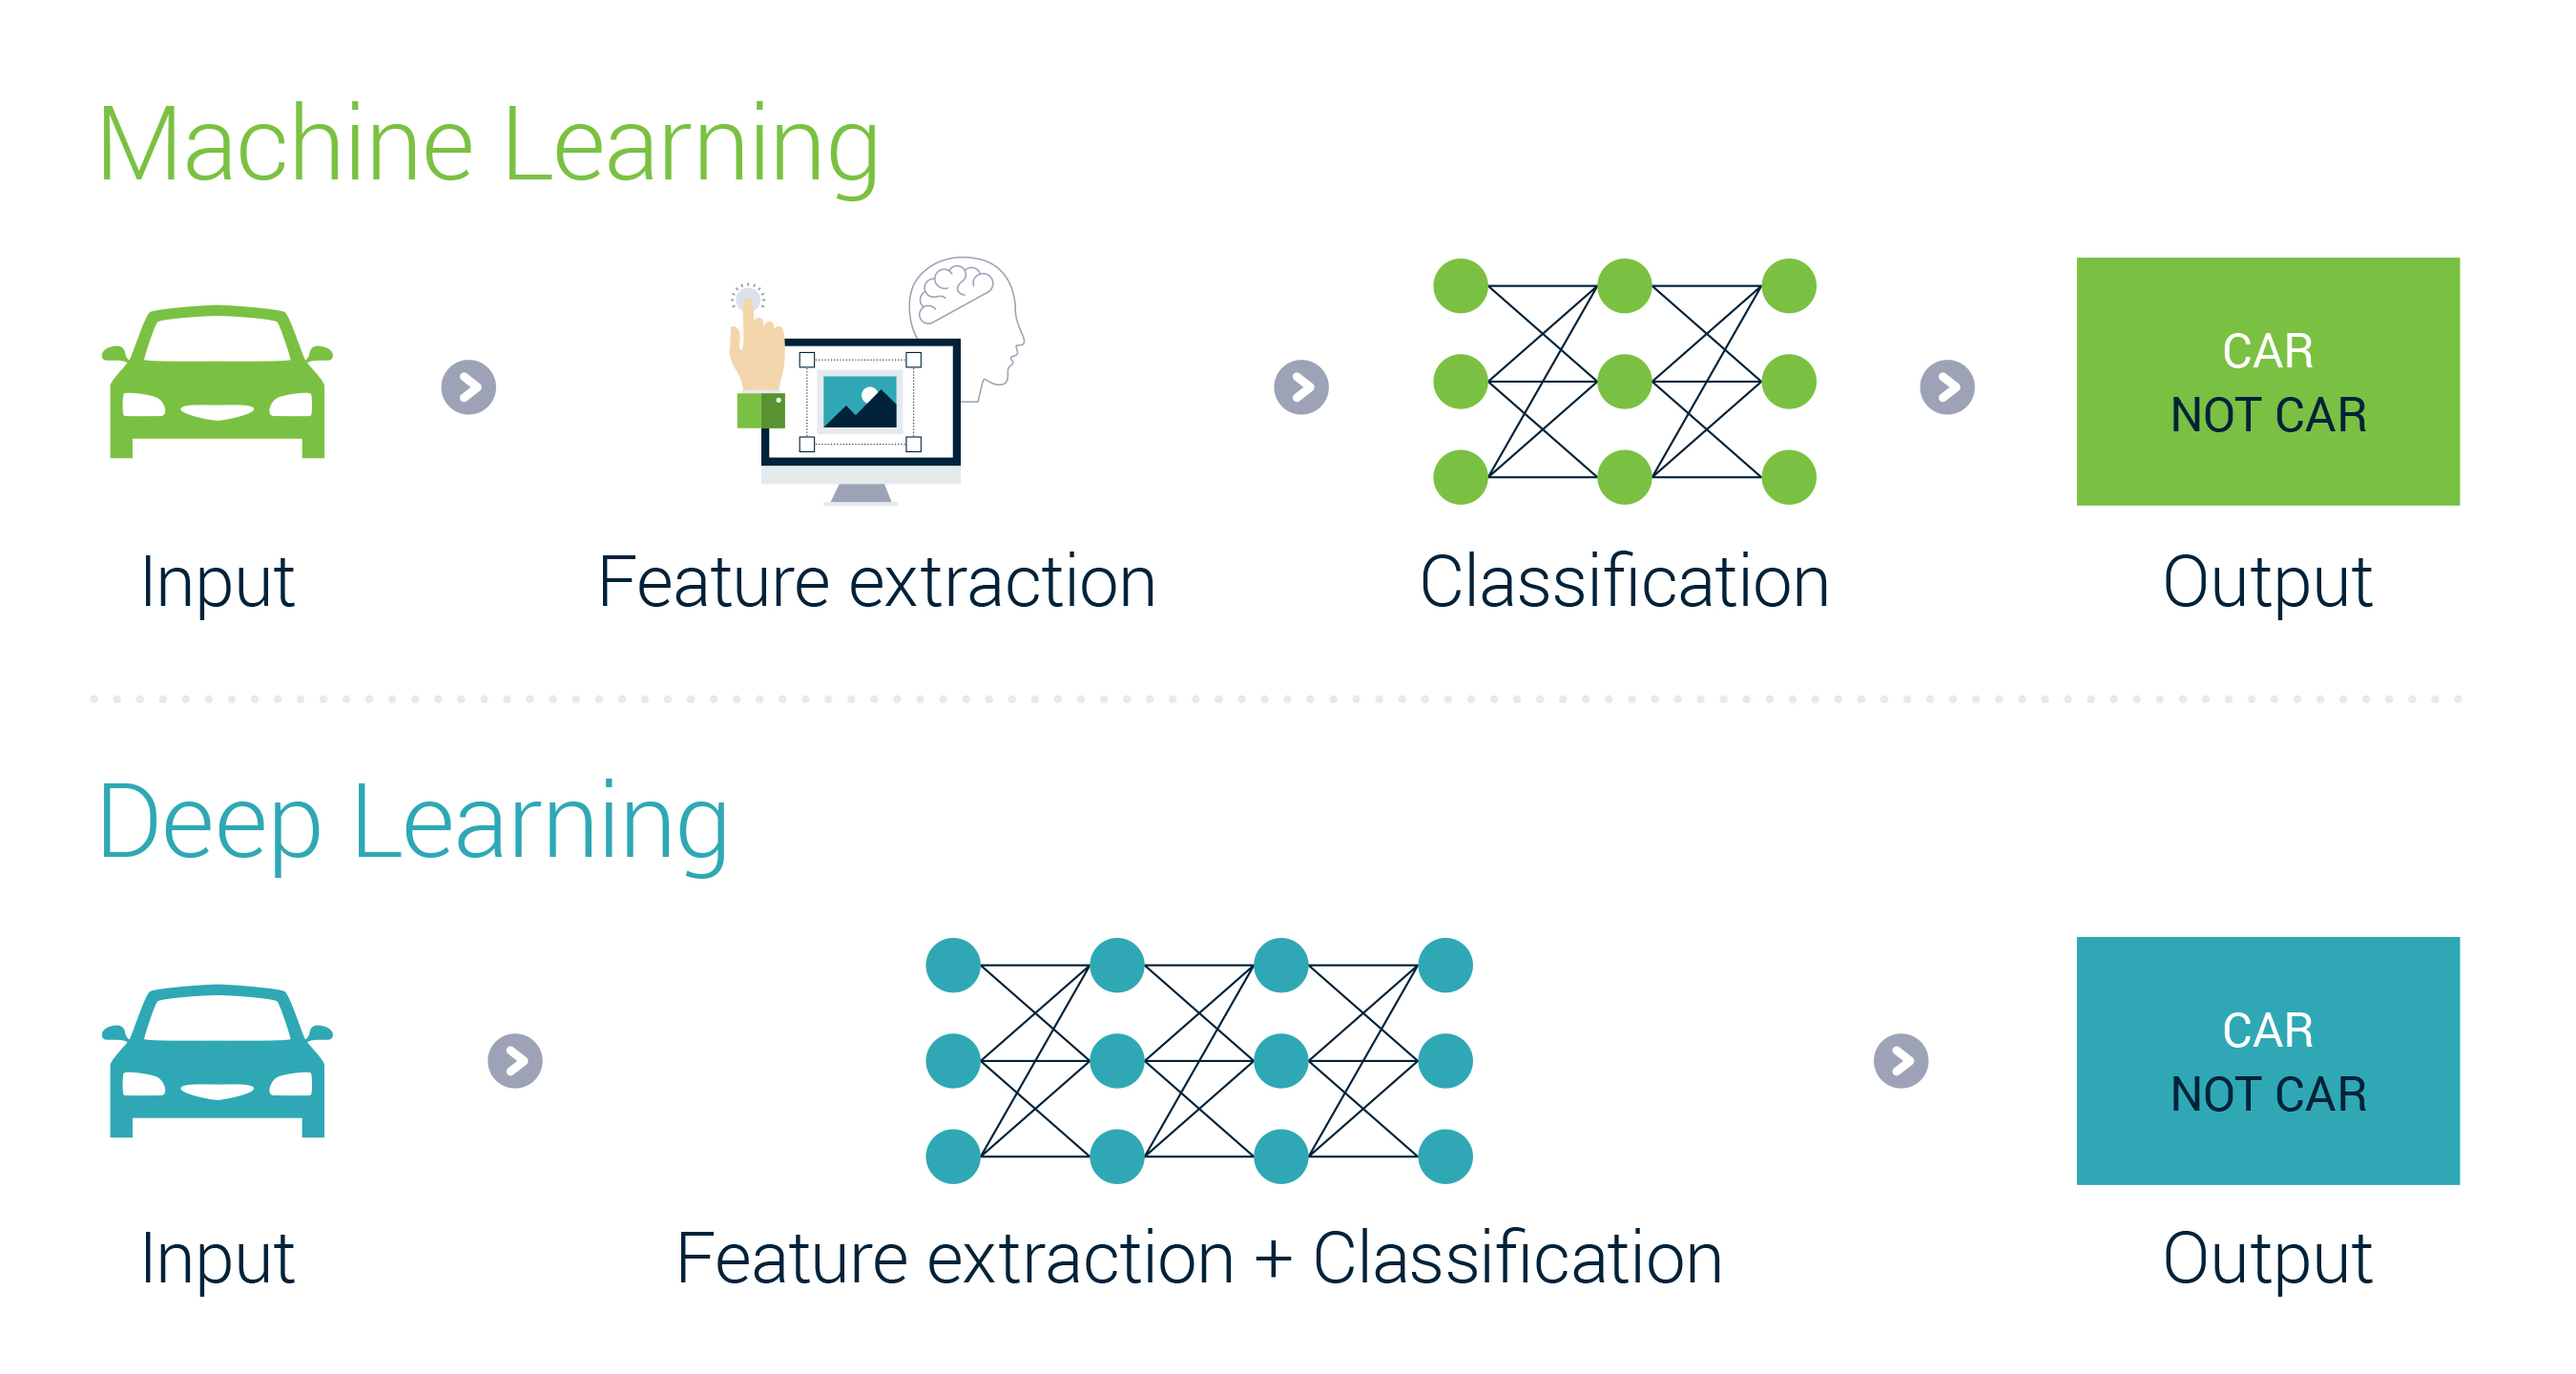 How Does Machine Learning Differ From Deep Learning?